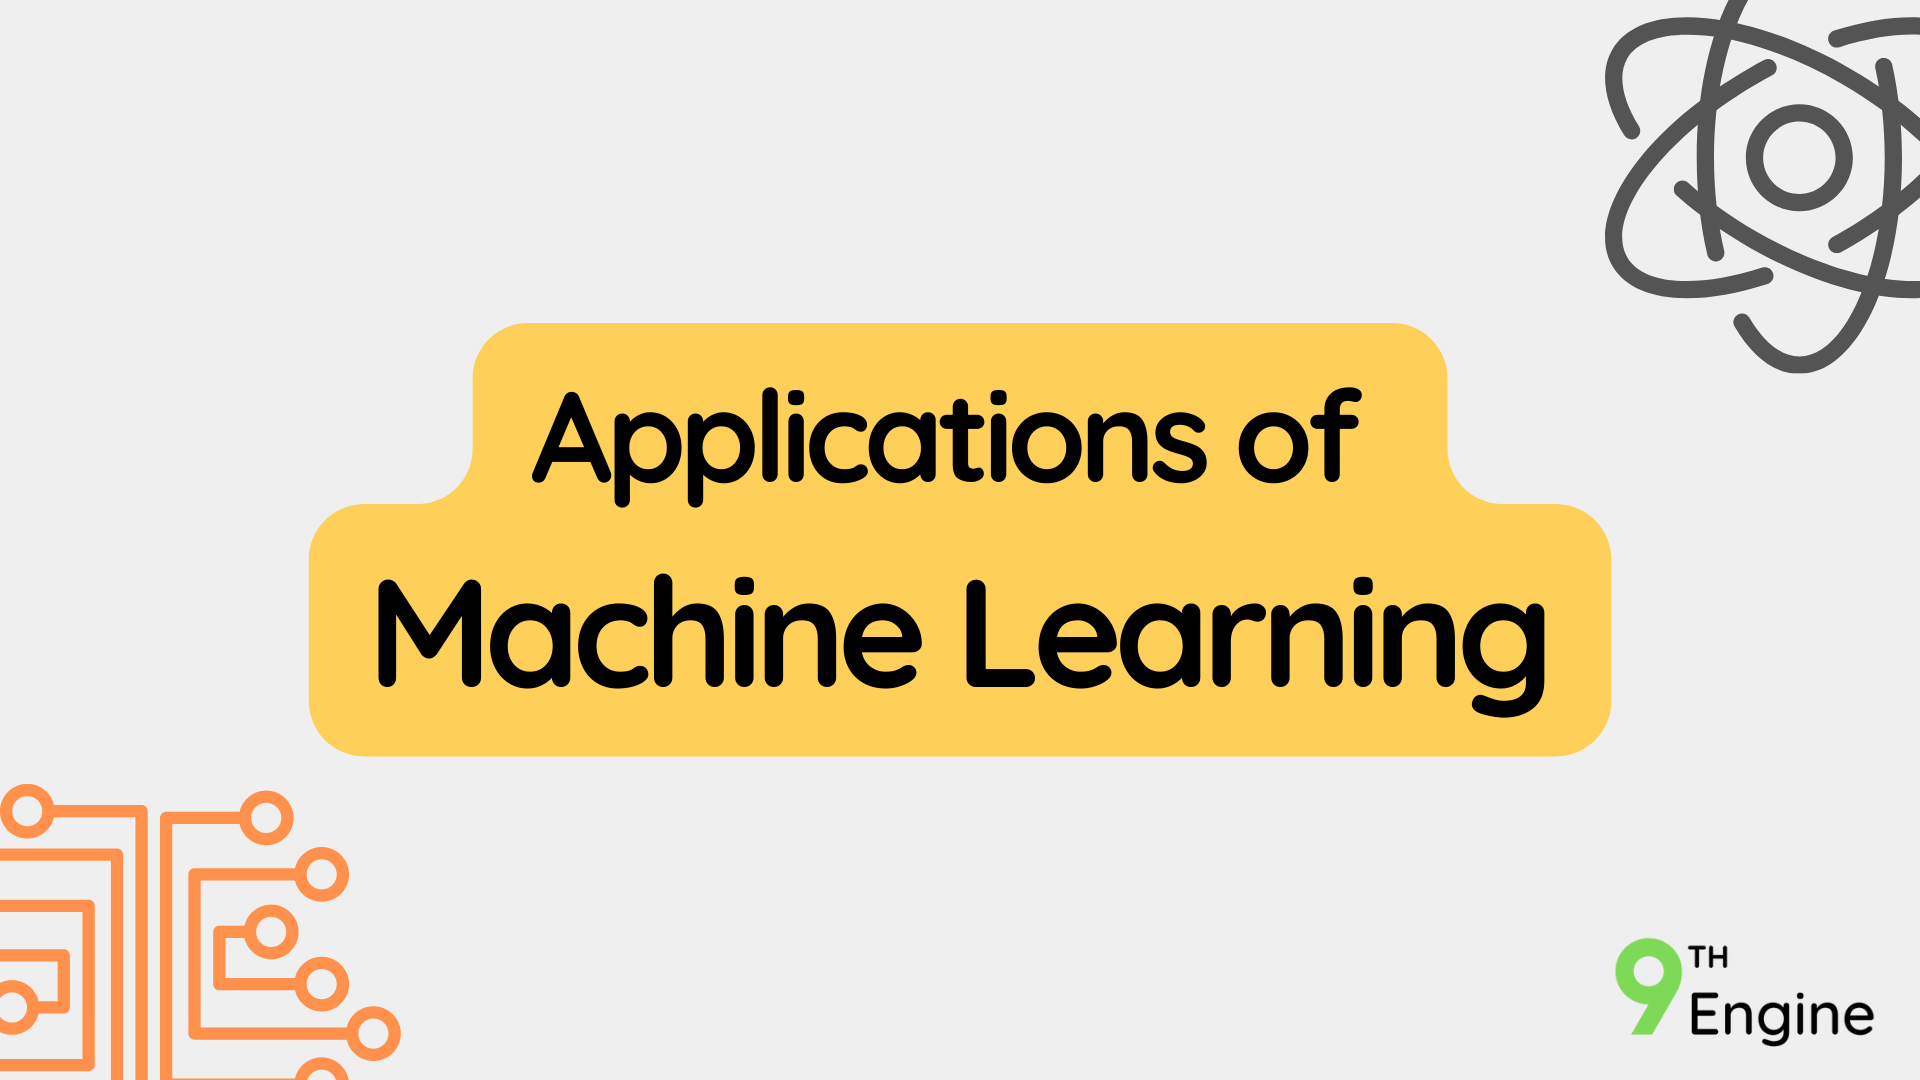 Applications of Machine Learning - NE